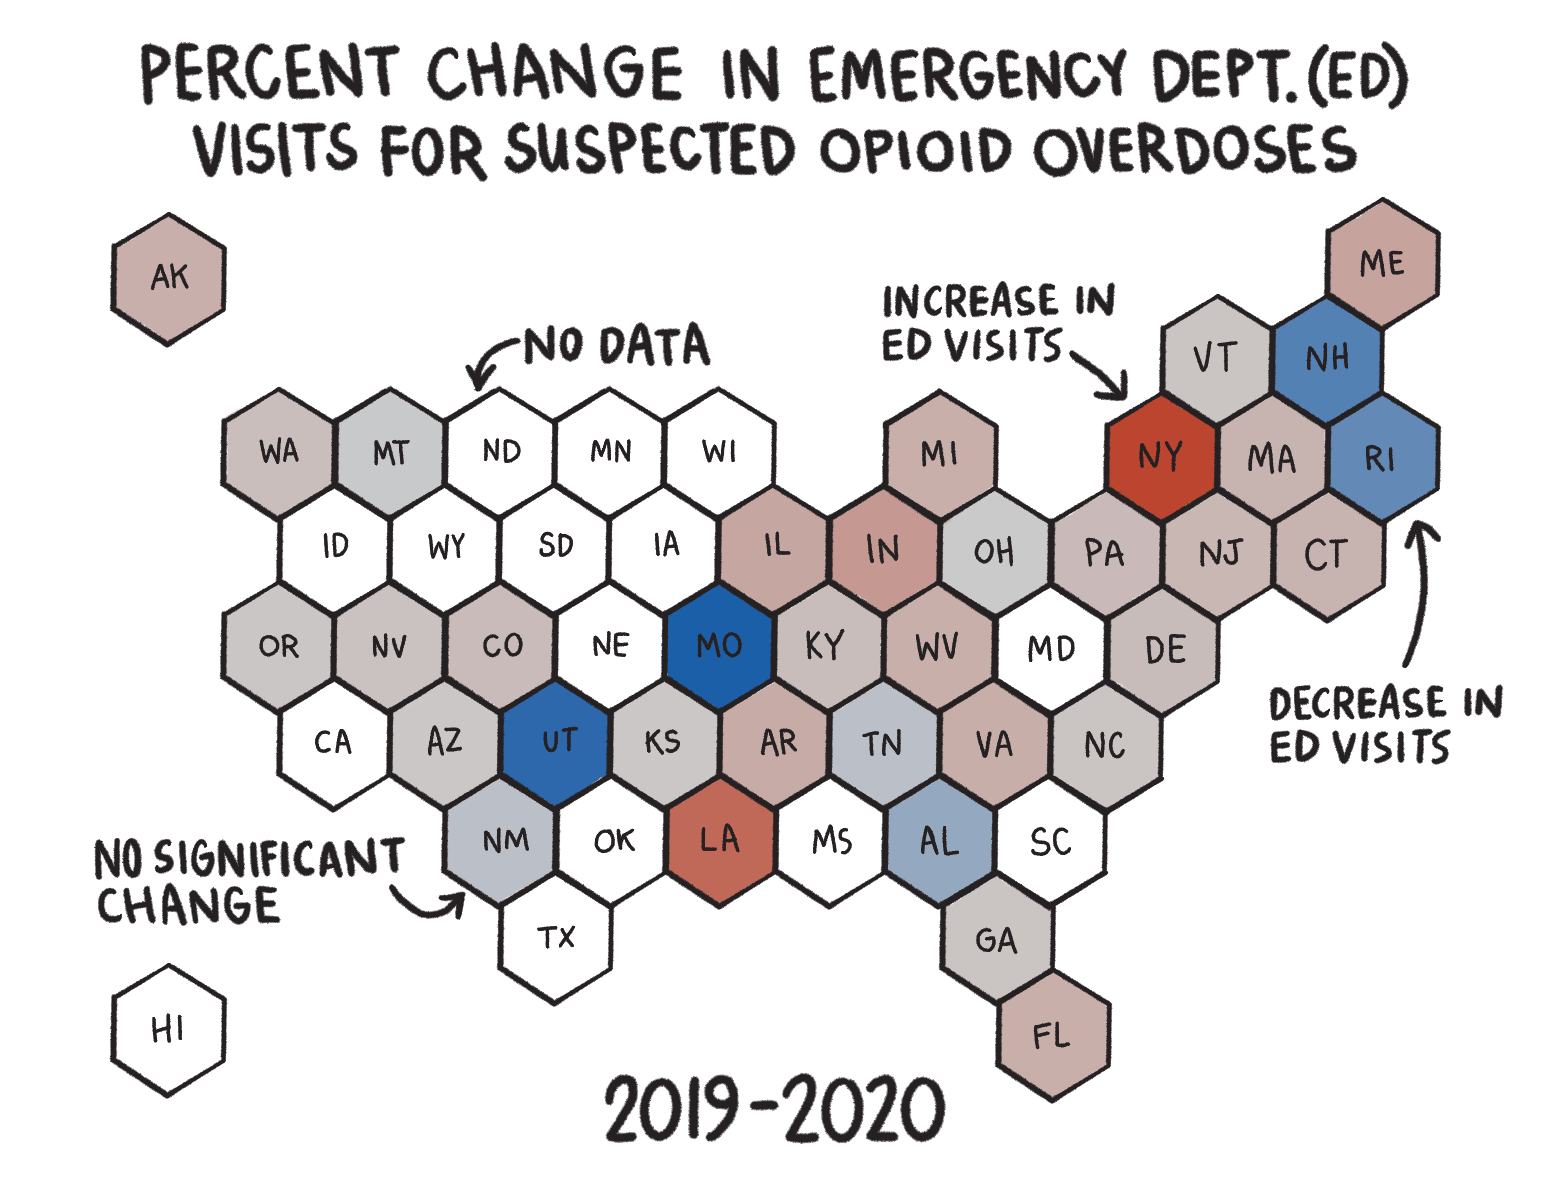 Hexagonal US State Chart showing the Percent change in emergency department visits for suspected opioid overdoses from 2019-2020. States shown in red had an increase in emergency department visits. States shown in blue had a decrease in emergency department visits. States in grey showed no change and those in white did not submit data. This first year, the increases and decreases in emergency department visits are somewhat equal.